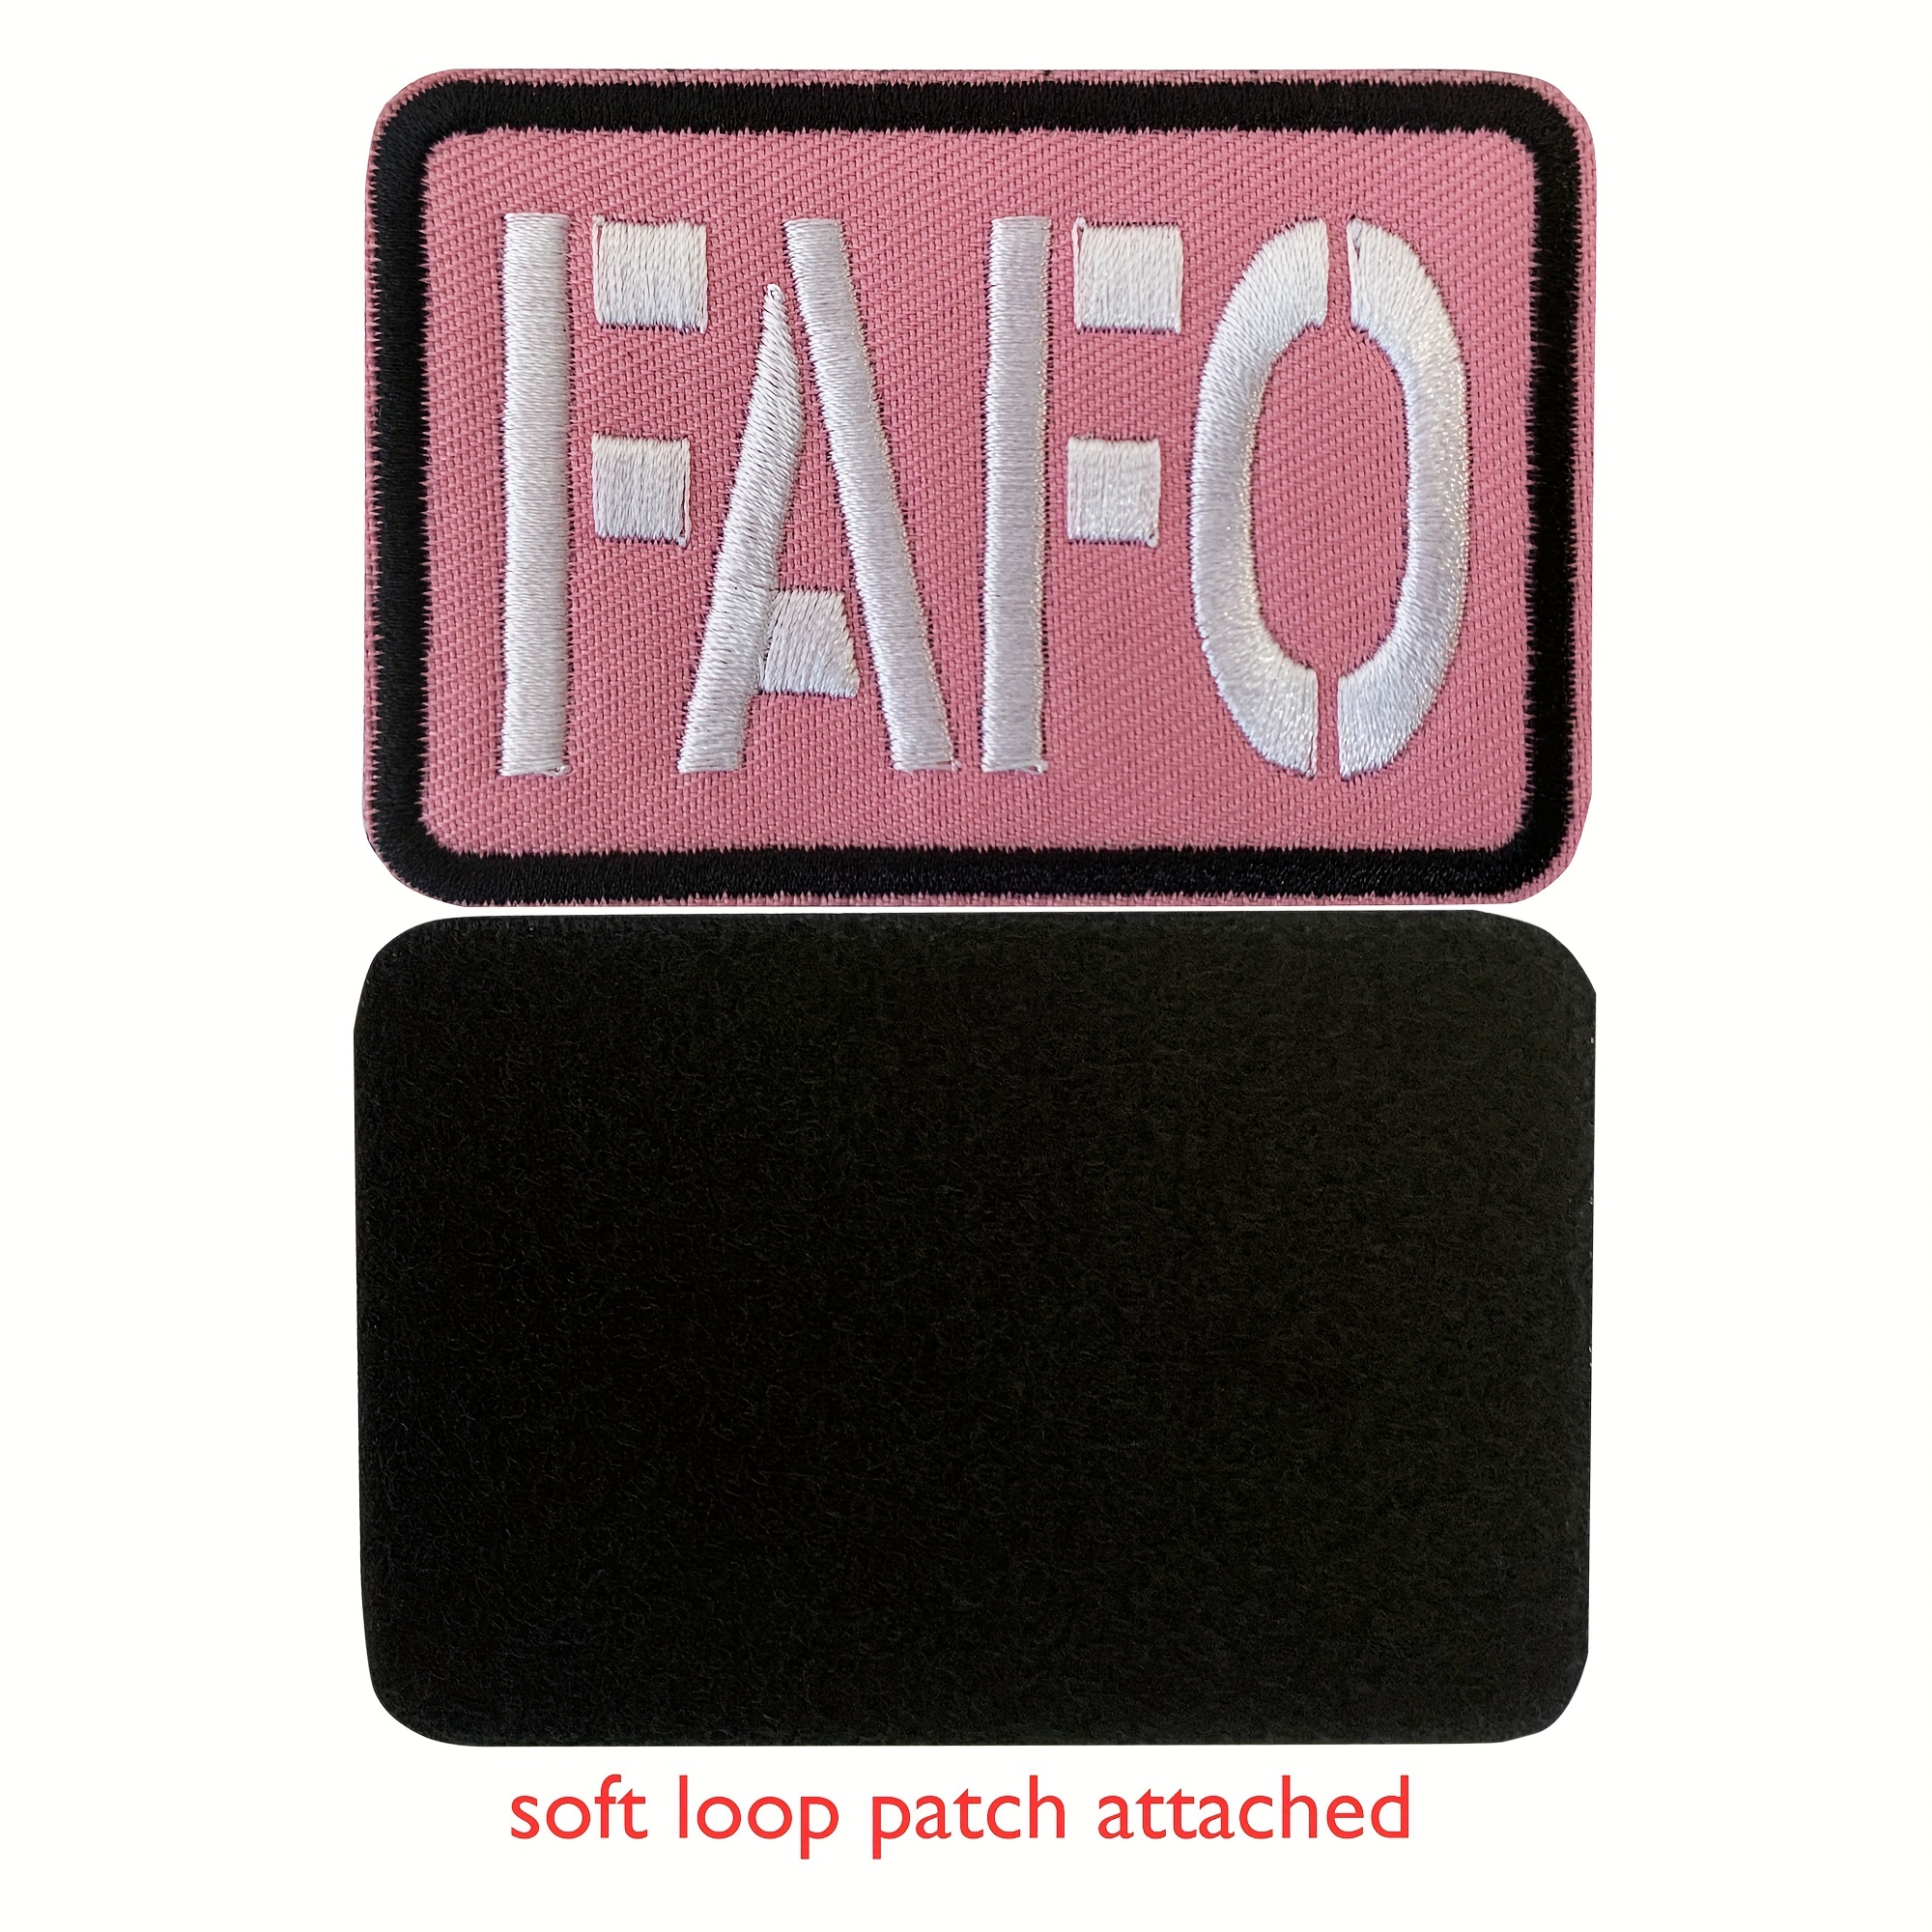 FAFO Embroidered Patch, Velcro Patch, Military-style Patches